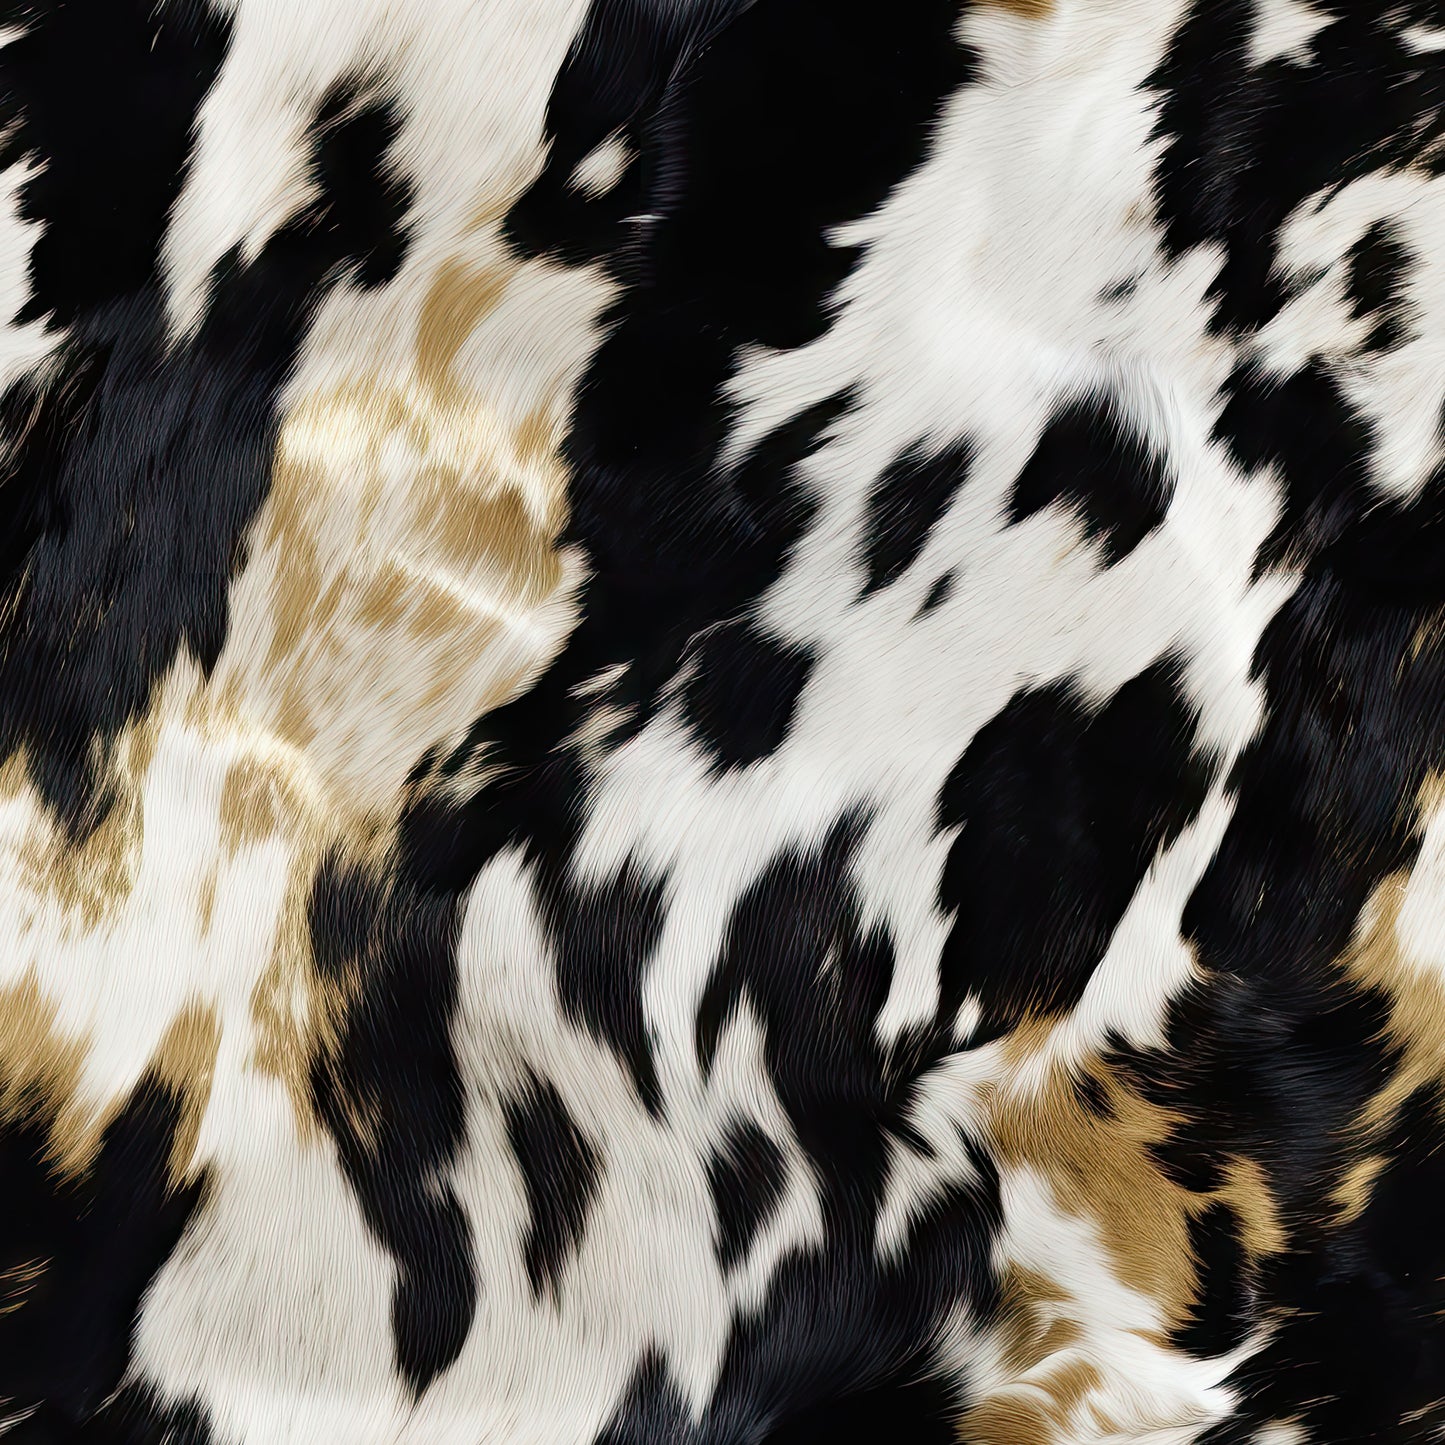 BLACK AND GOLD COWHIDE - MULTIPLE VARIATIONS